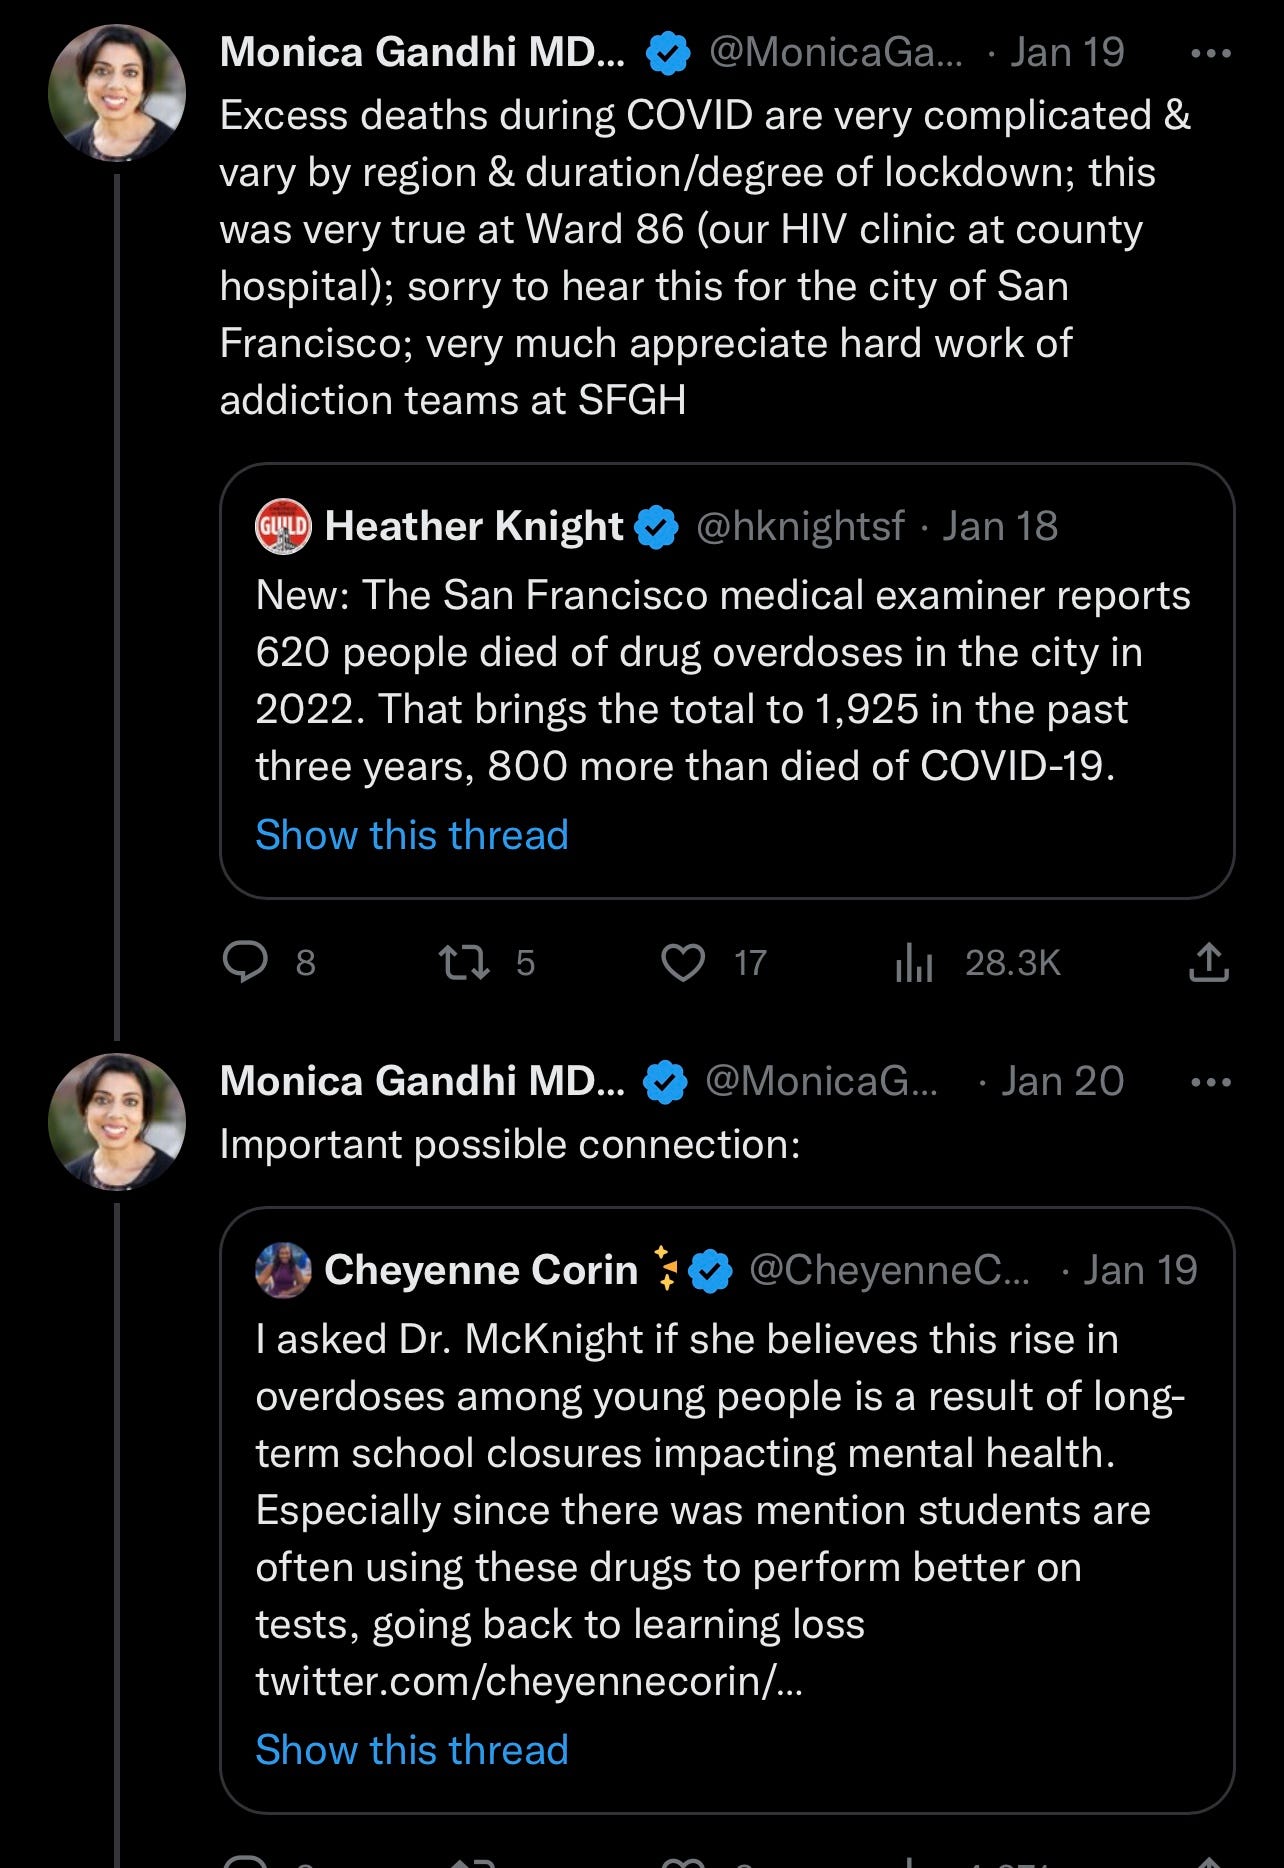 two monica gandhi tweets blaiming COVID protections and drug overdoses instead of COVID for excess deaths